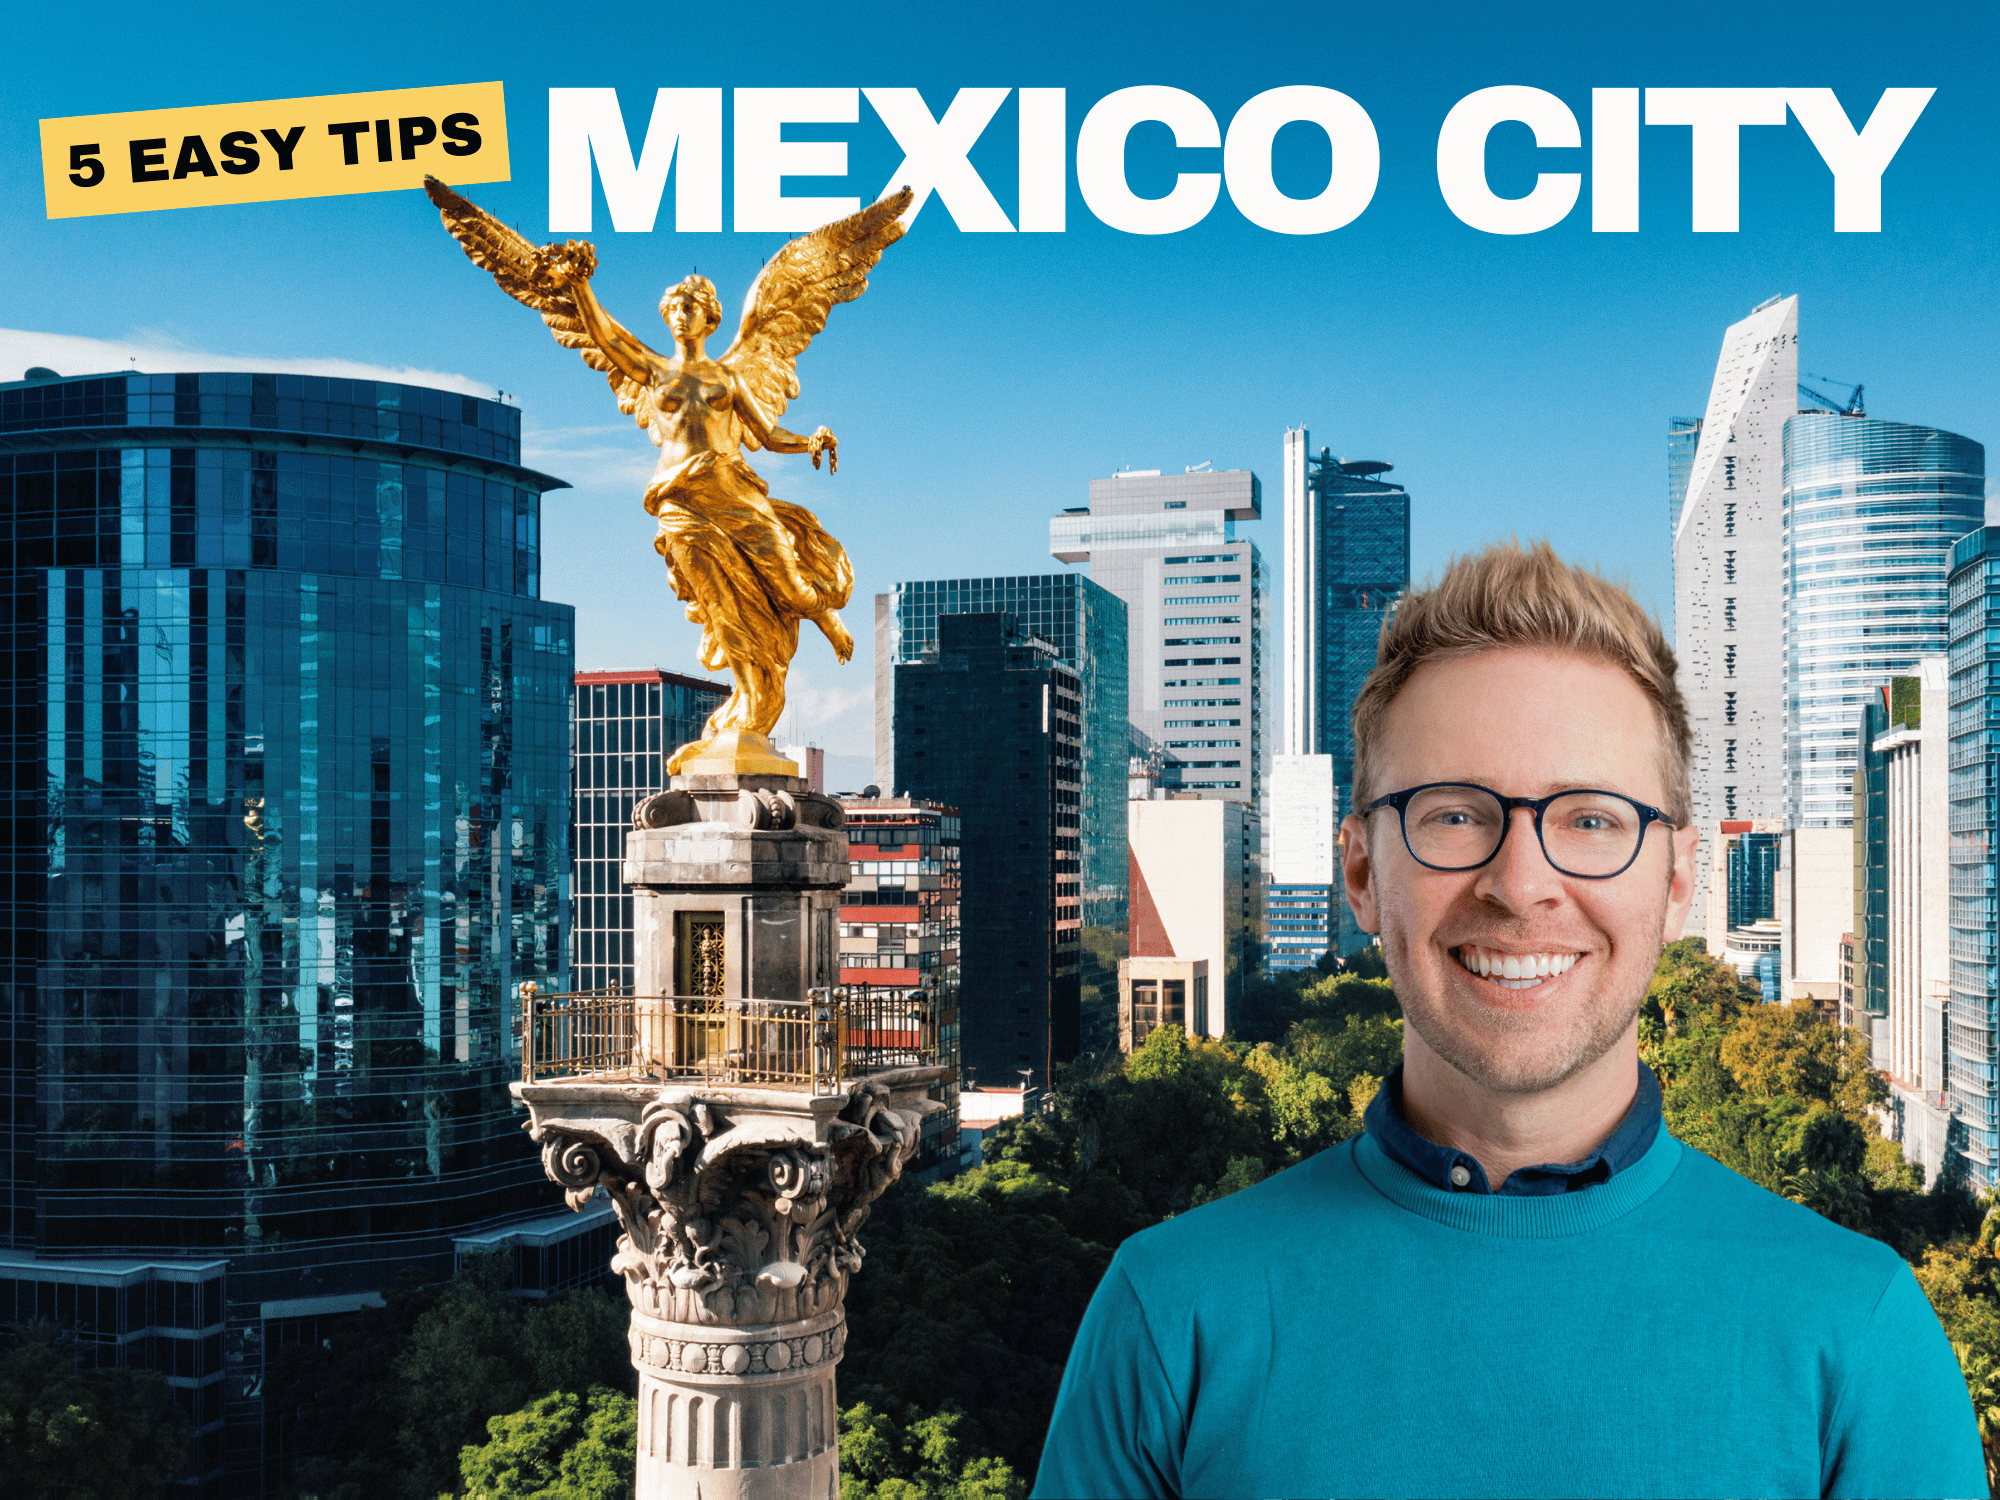 My 5 Tips for Mexico City: Easy Advice for Visitors